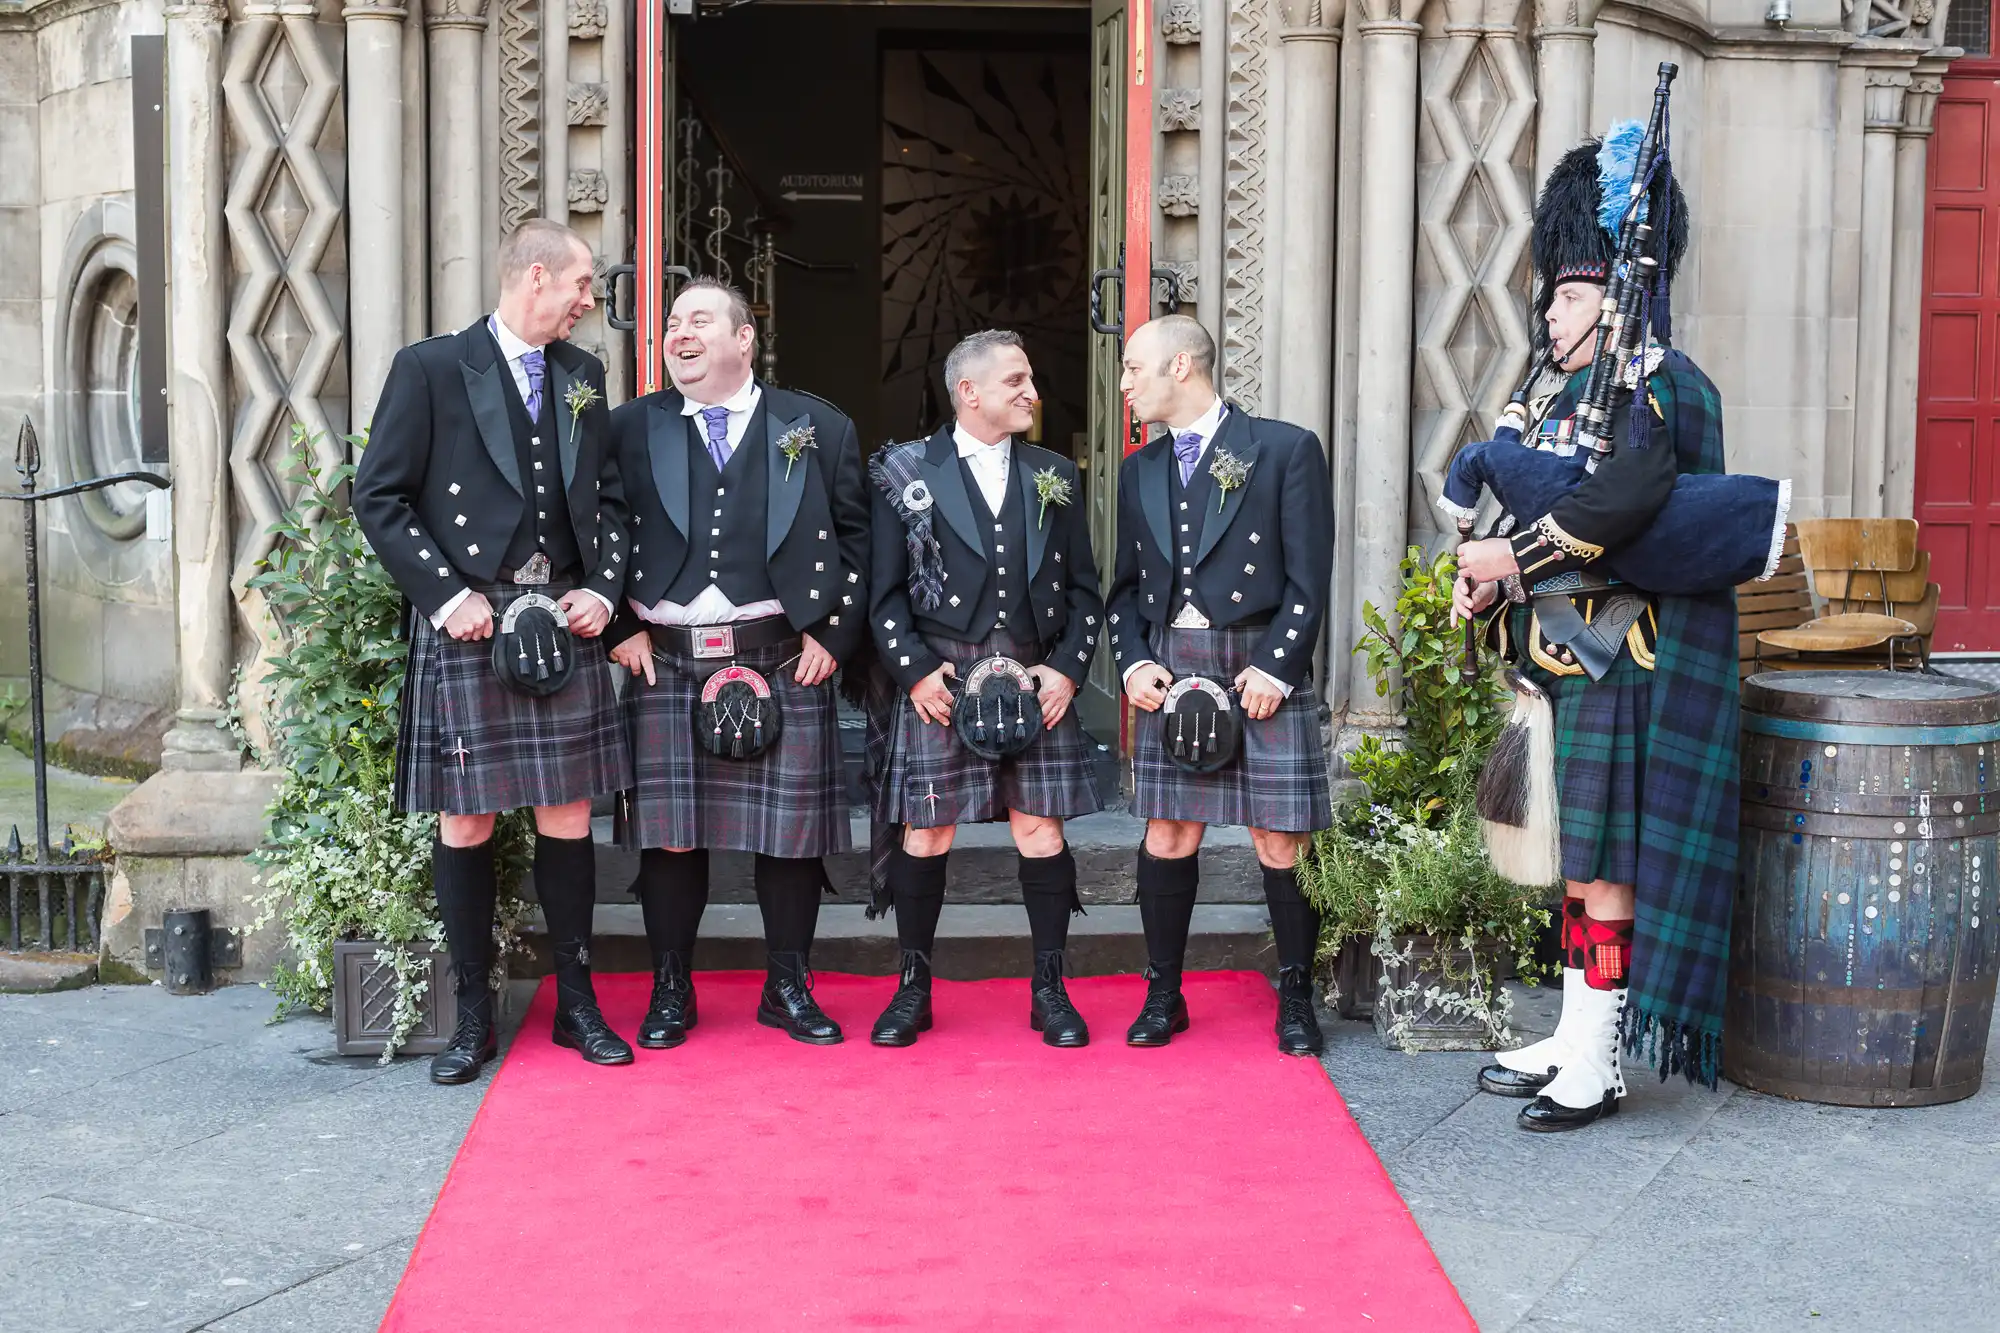 Five men in traditional scottish kilts laughing together outside a building entrance, with a bagpiper in full attire standing to the side.